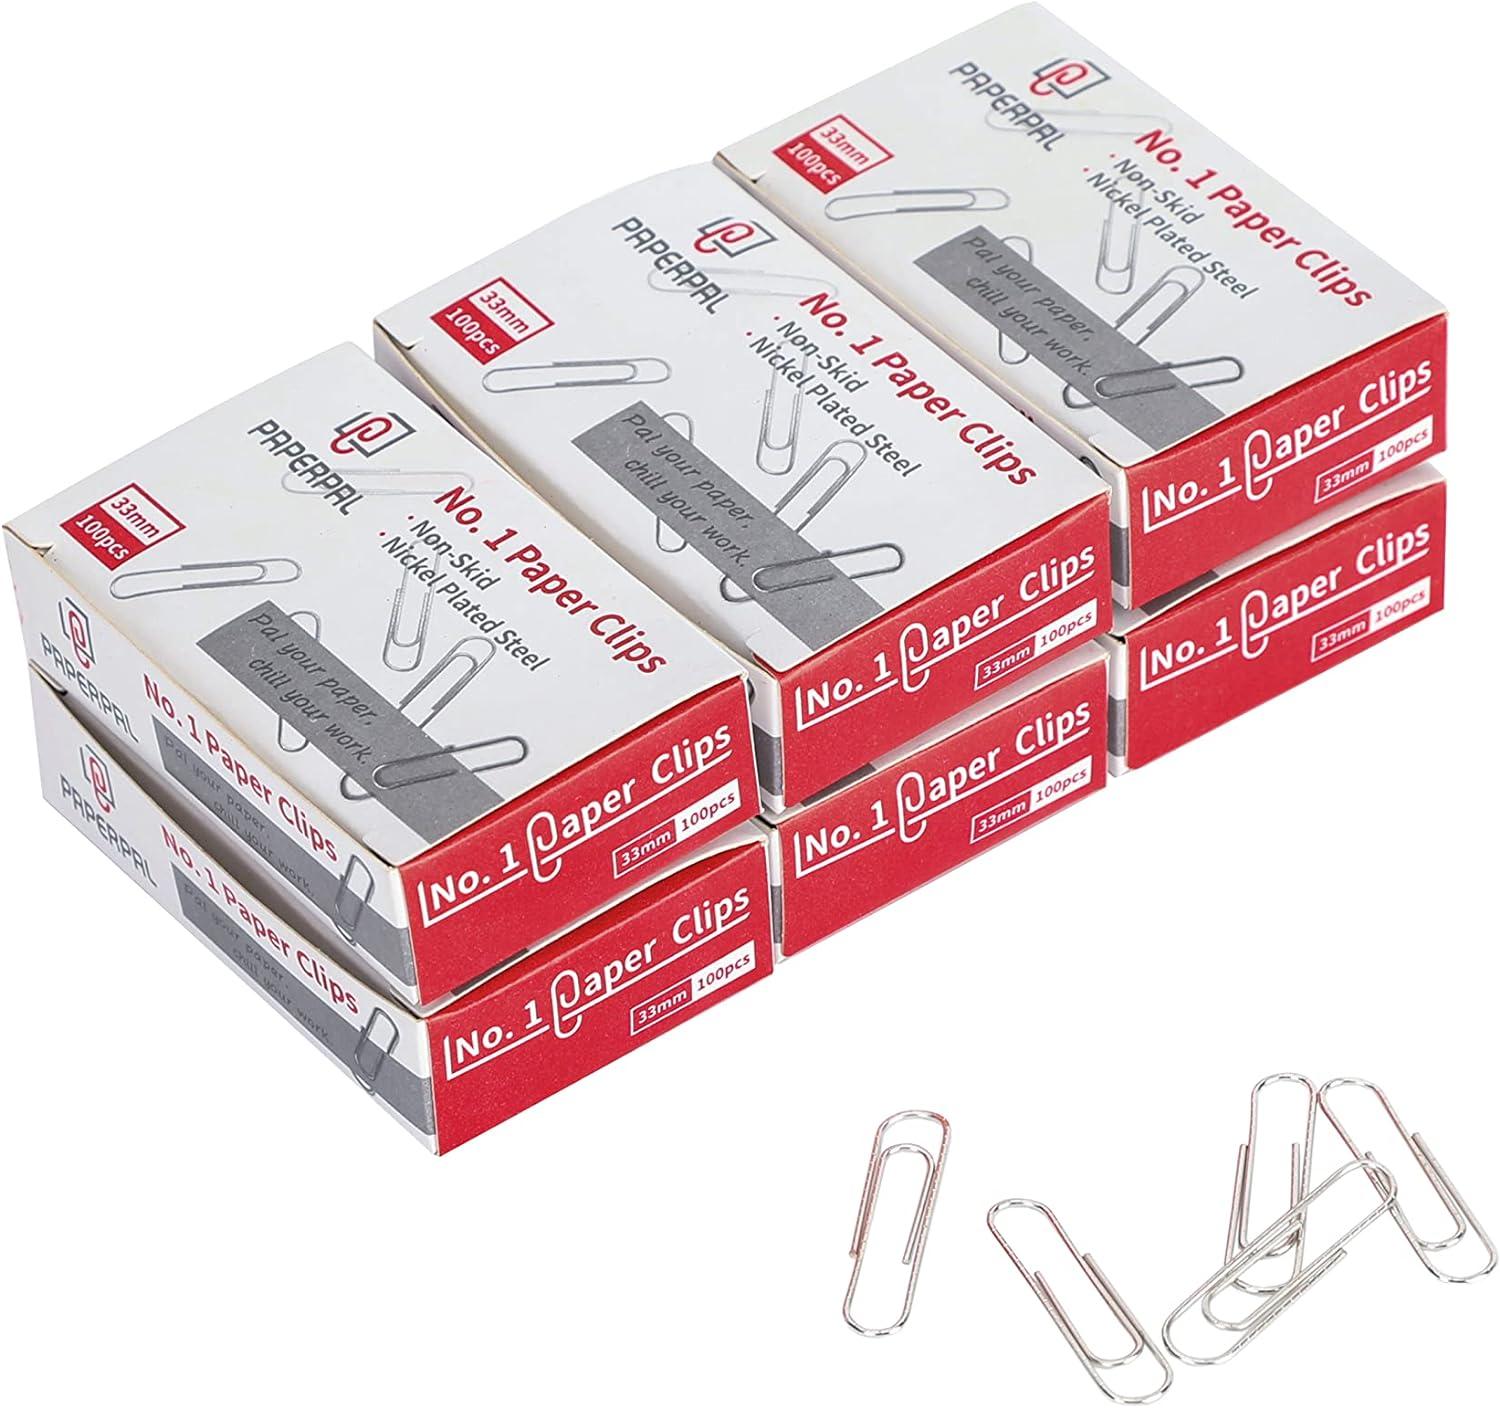 paperpal #1 nonskid paper clips 600 medium paper clips 6 boxes of 100 each paperclips for office school and